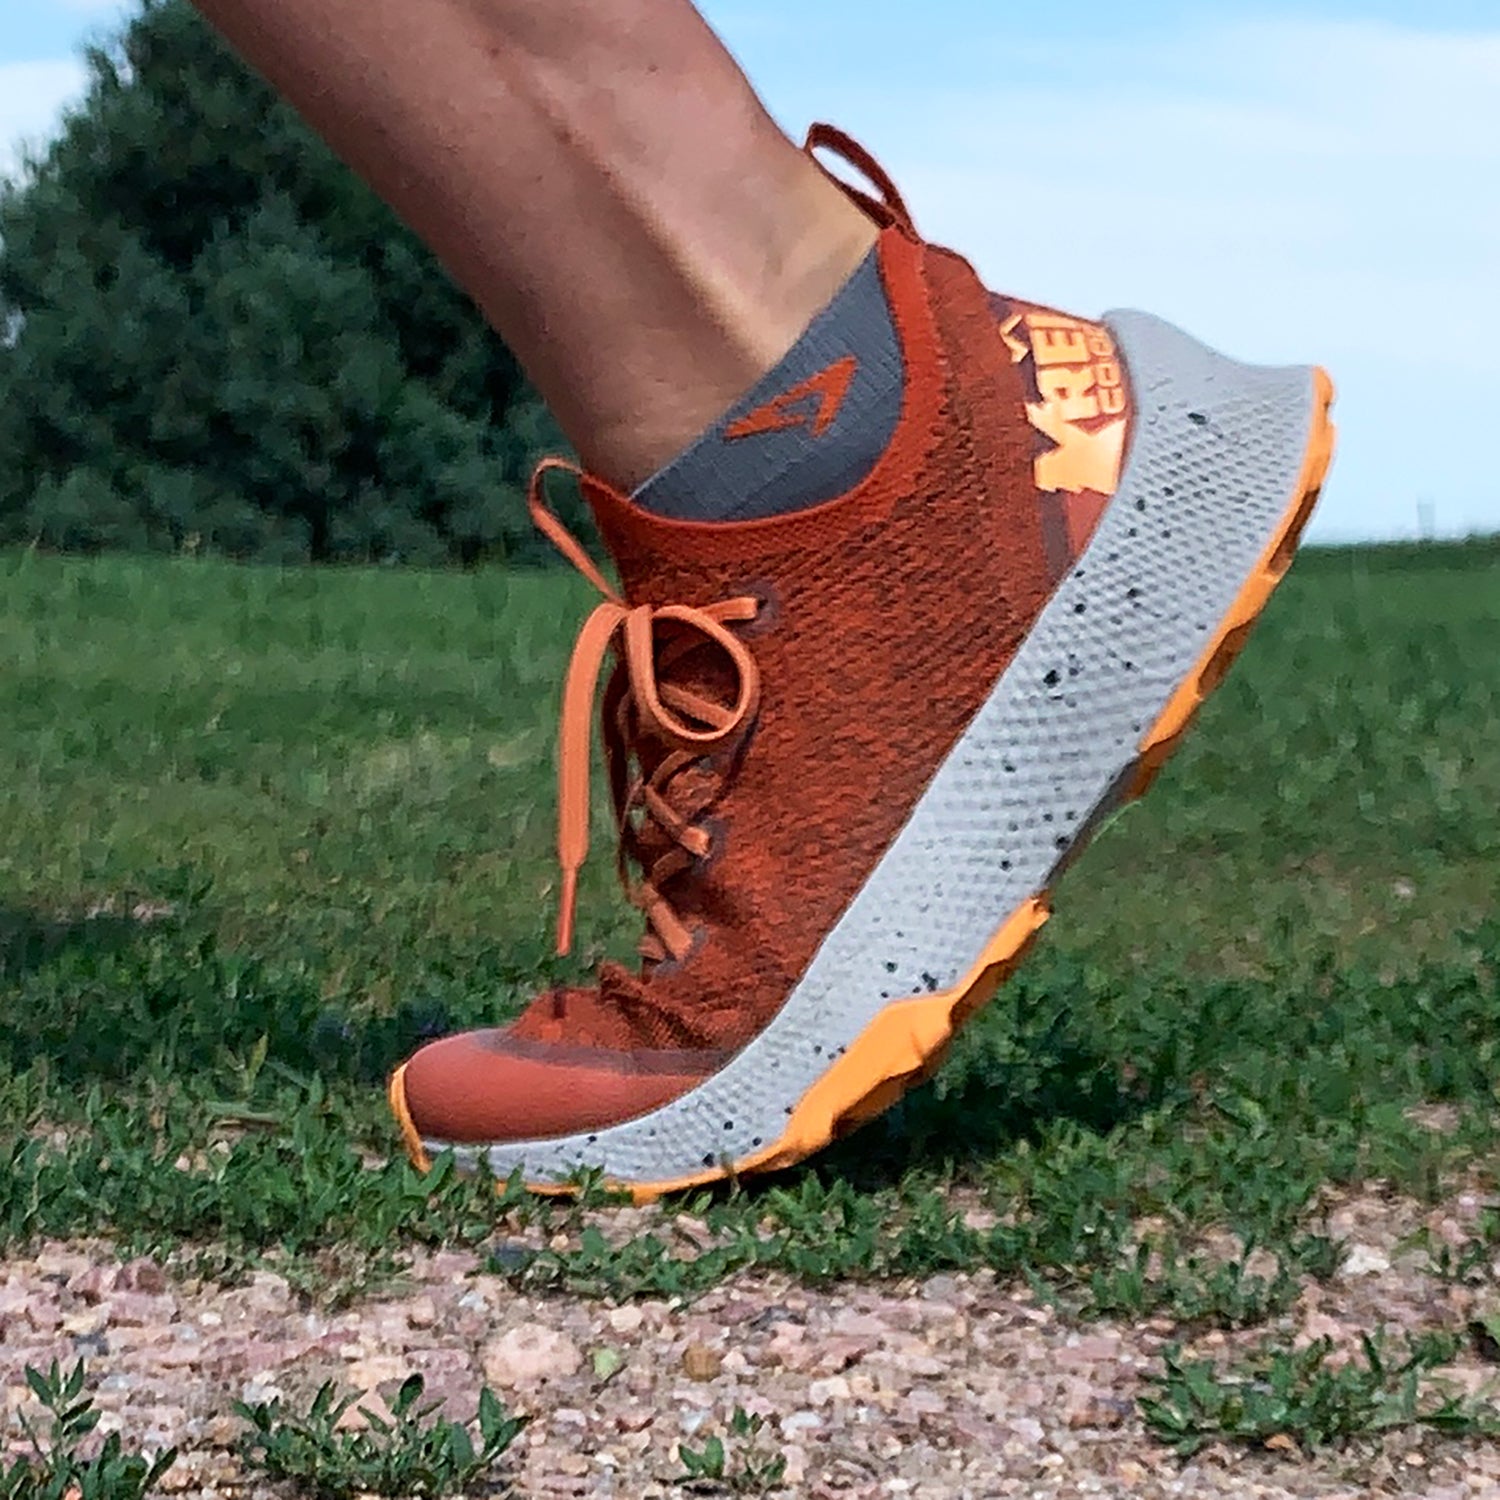 We Put REI's Algae-Powered, Recycled-Material Trail-Running Shoe to the Test